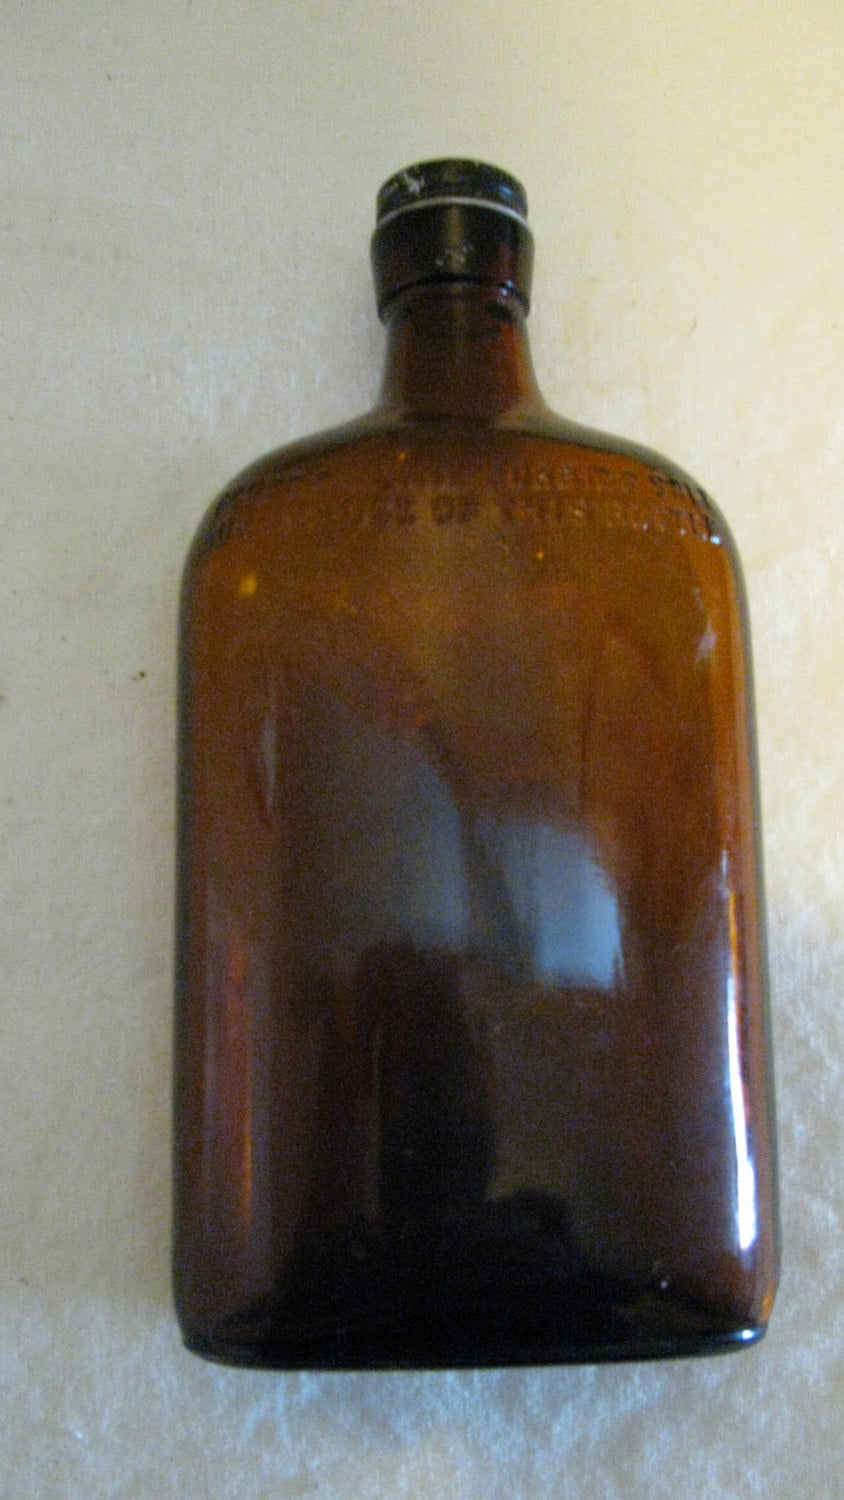 Vintage Whiskey Bottle 1 Pint New England By Flavsantiques On Etsy